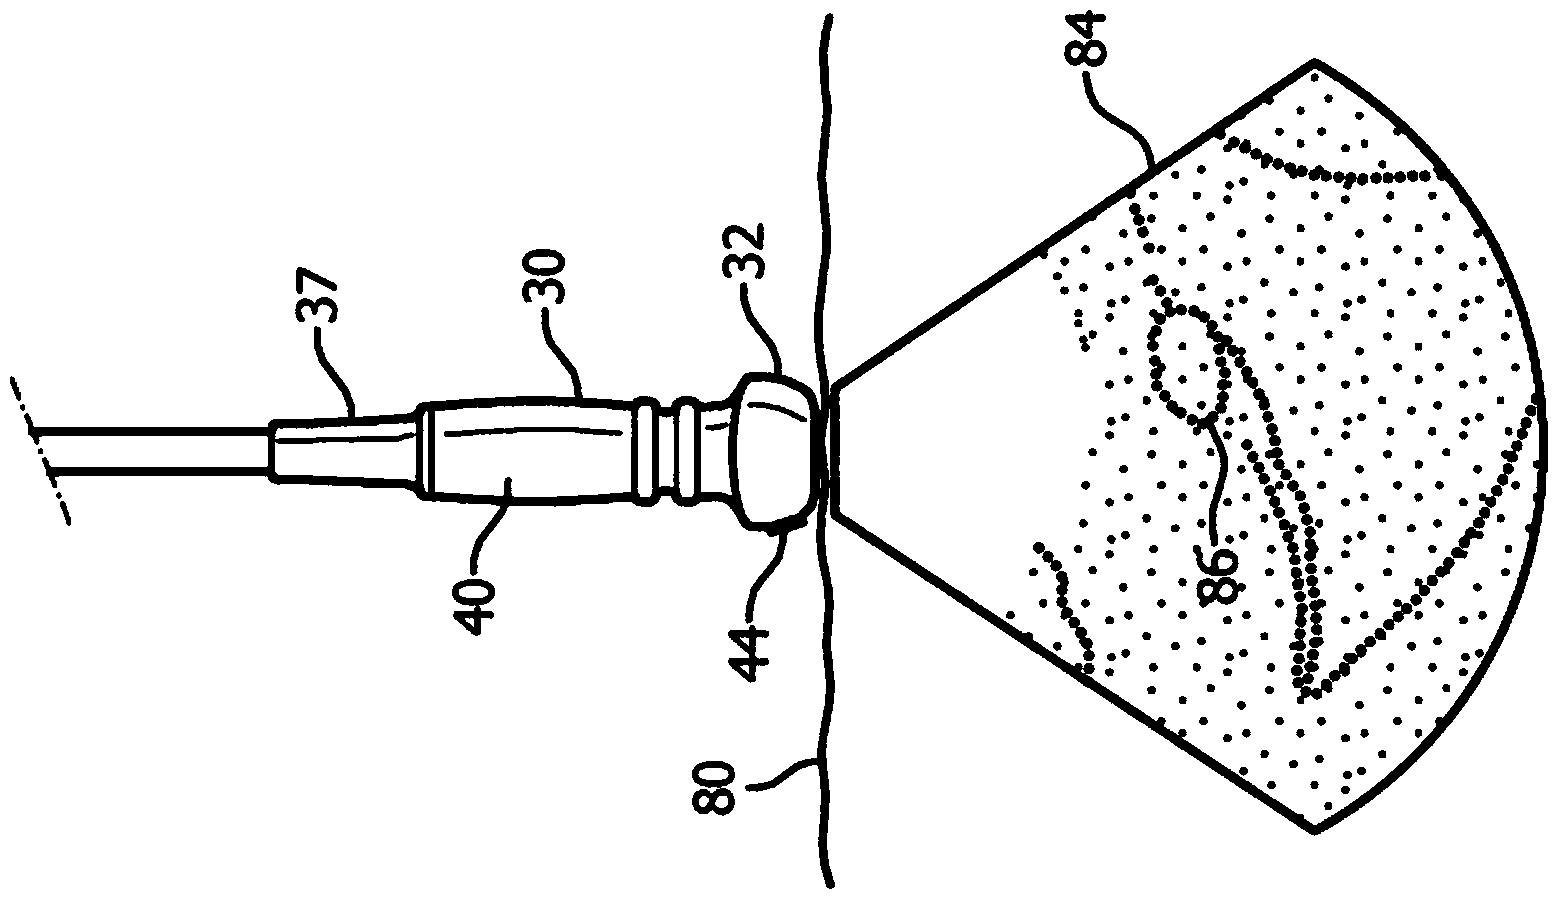 Ultrasonic Guidance Of A Needle Path During Biopsy